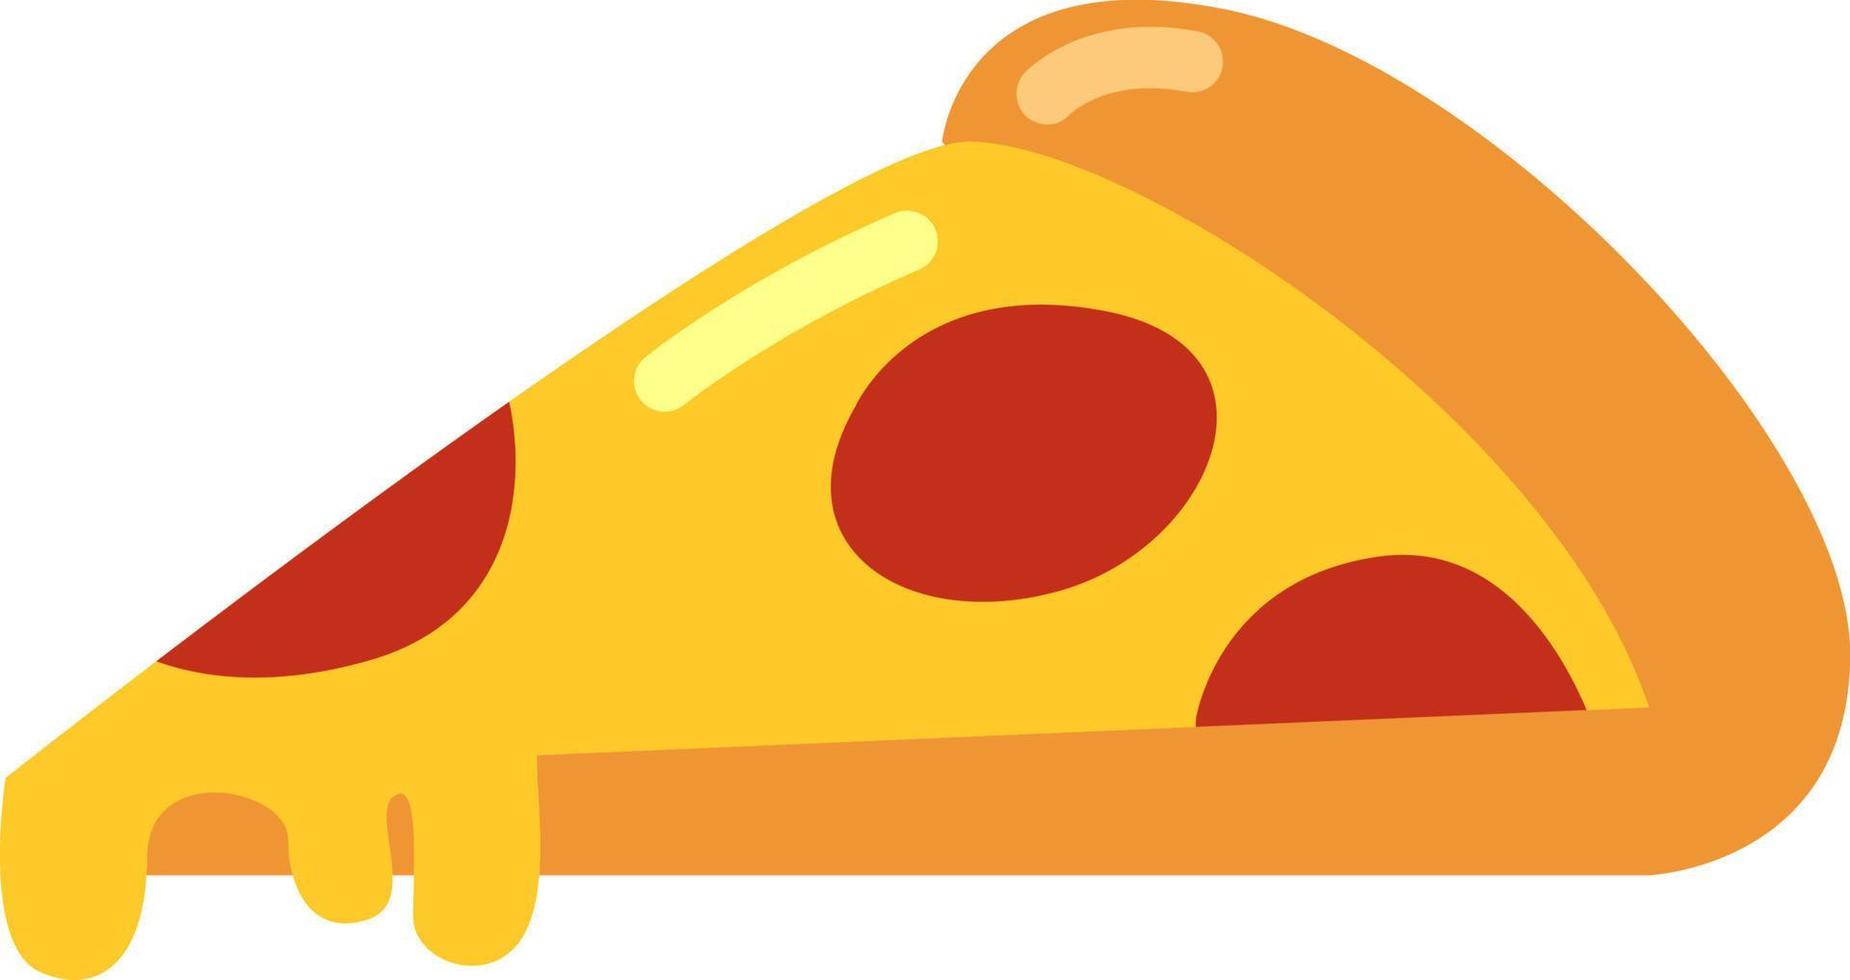 Pizza with cheese, illustration, vector on white background.